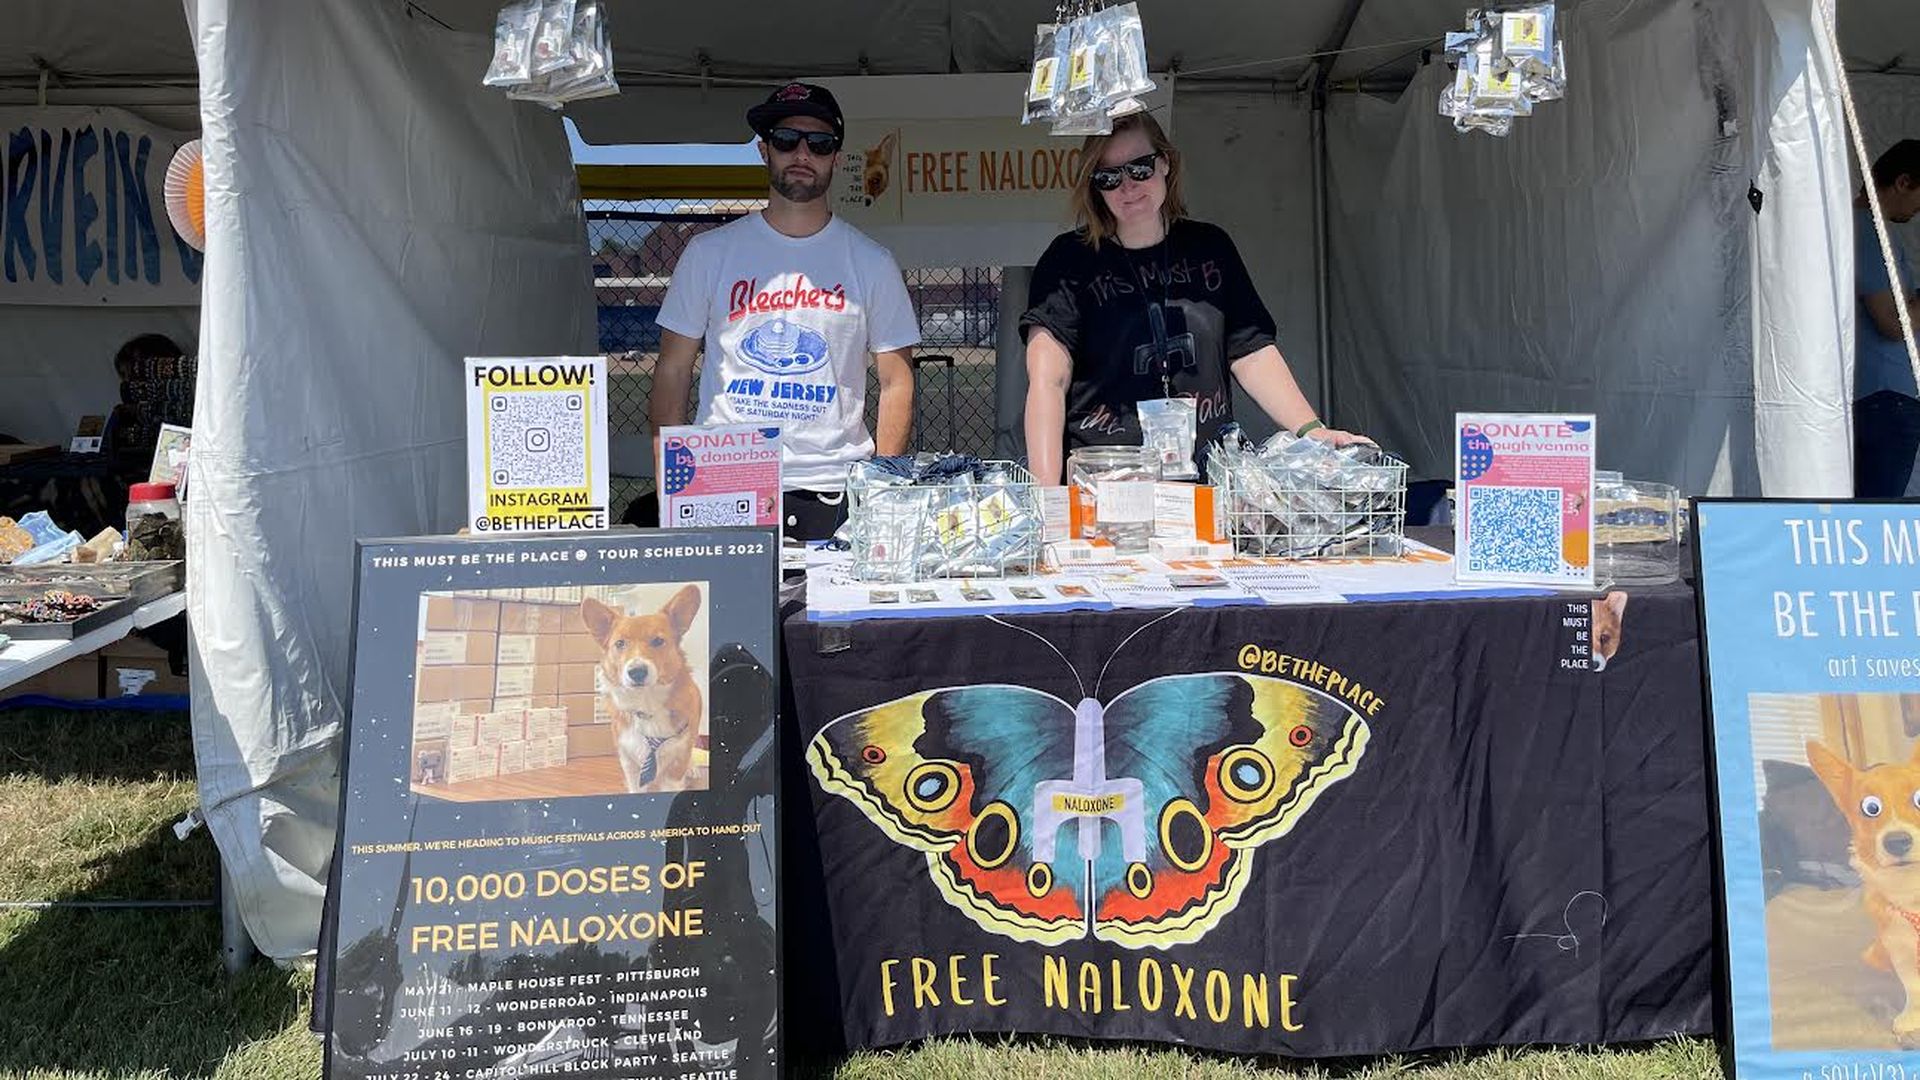 Two non-profit founders are seen at a music festival table distributing free naloxone.